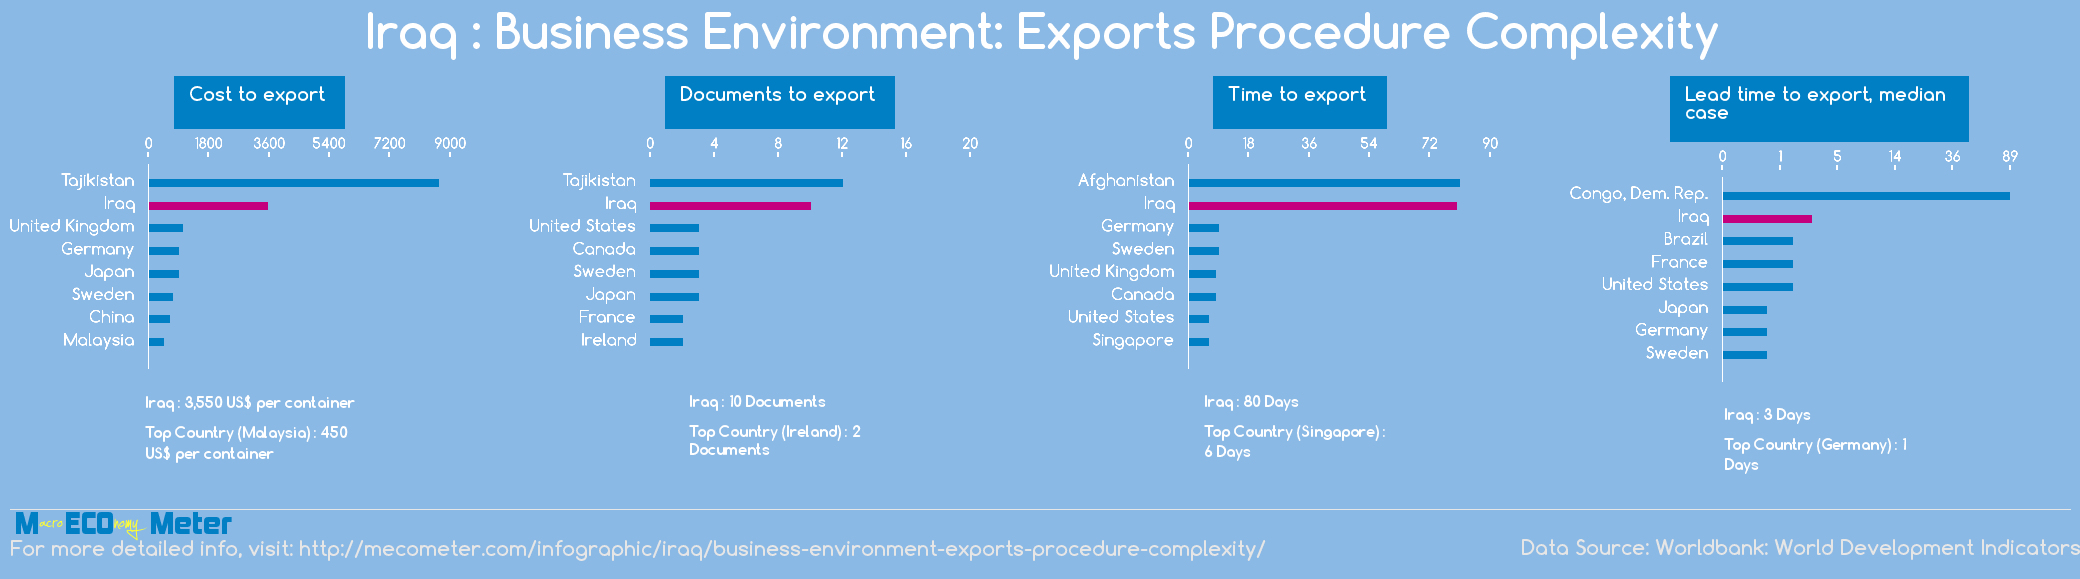 Iraq : Business Environment: Exports Procedure Complexity